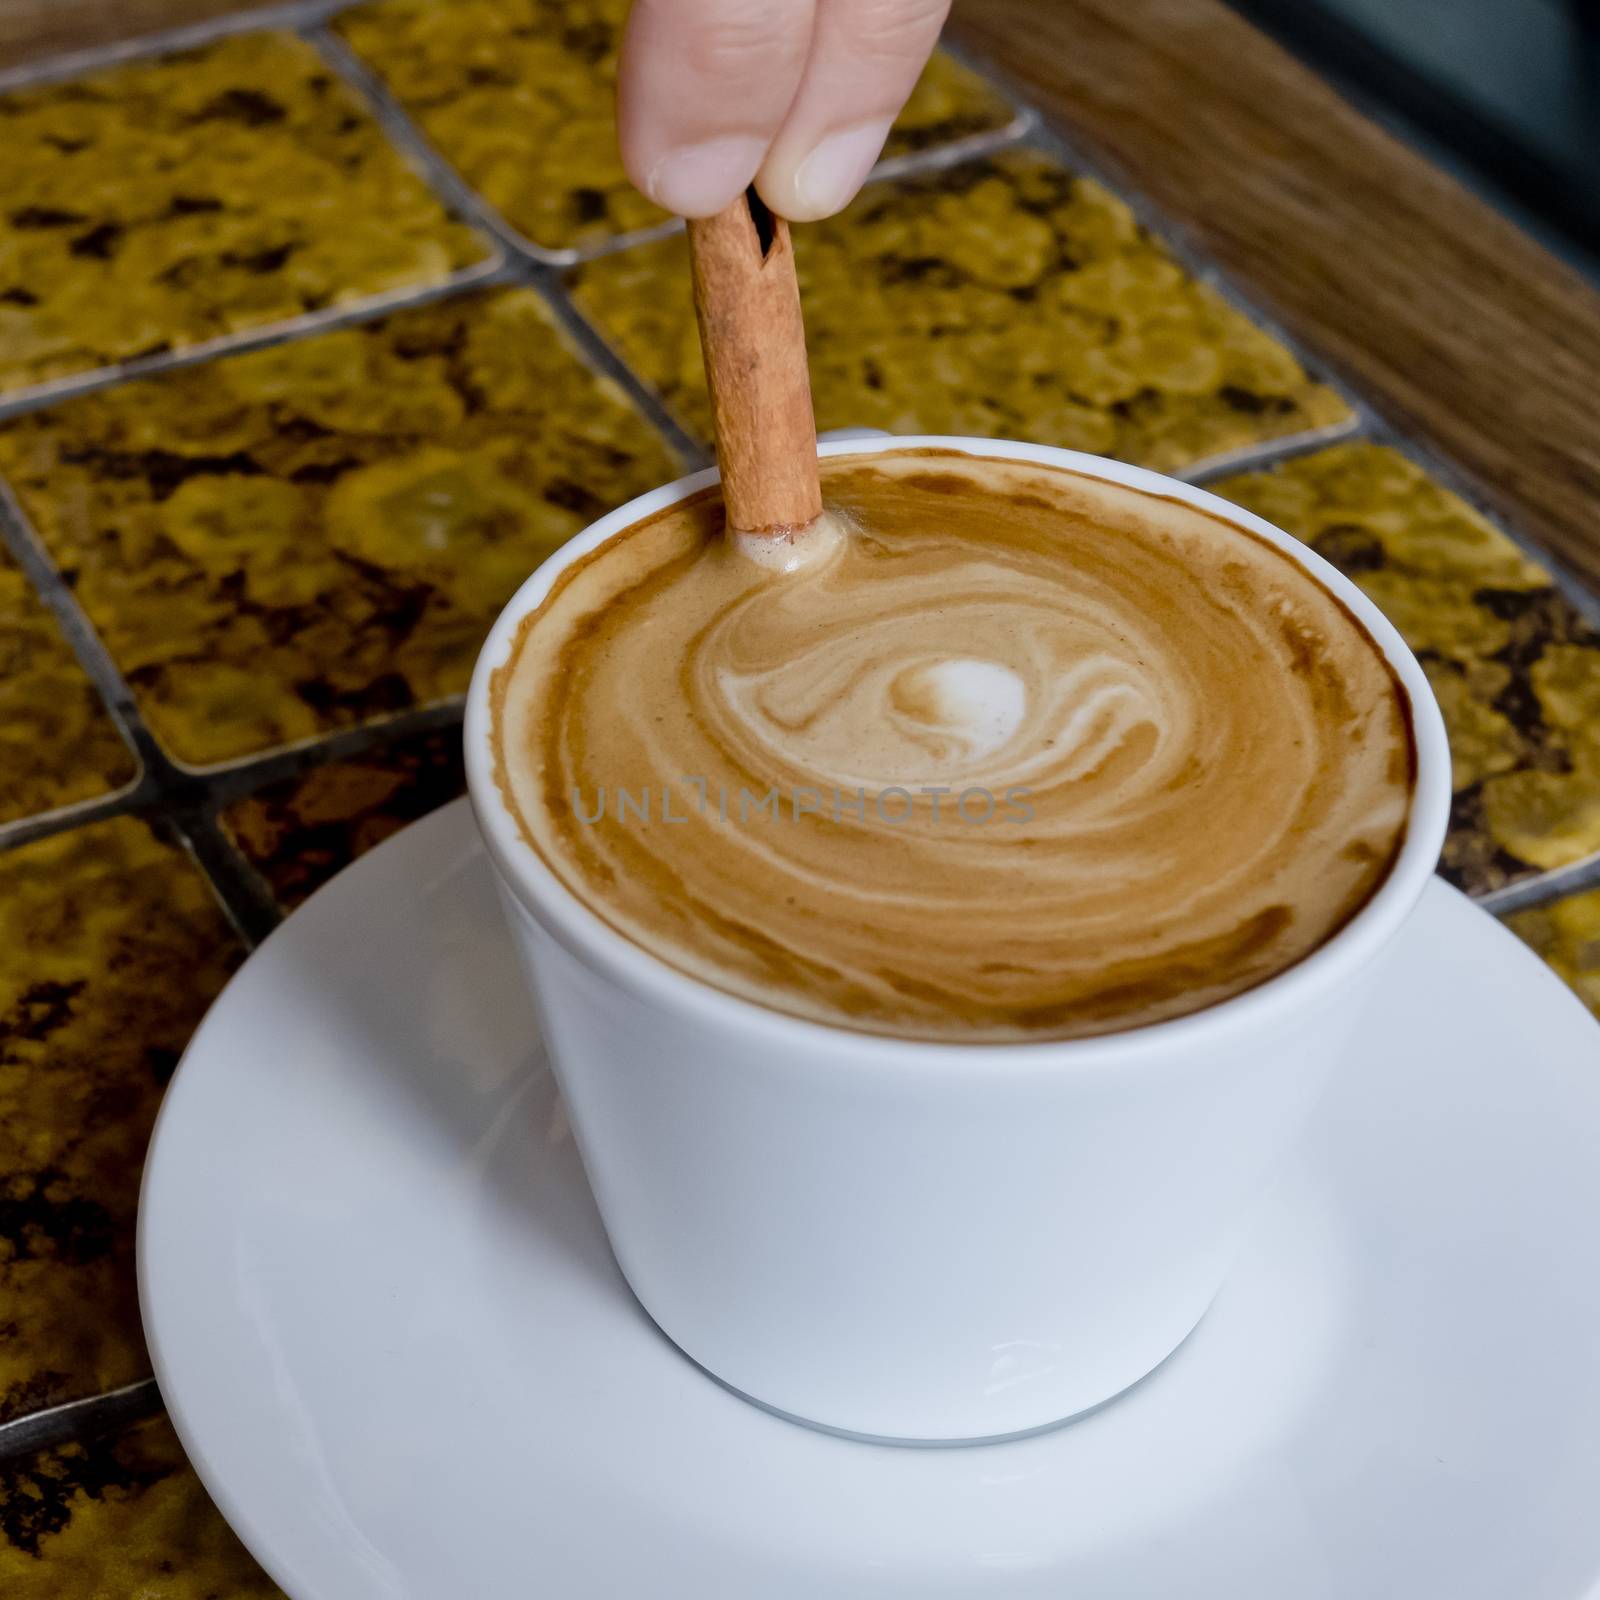 A coffee cup Latte being stirred by Cinnamon sticks. by art9858